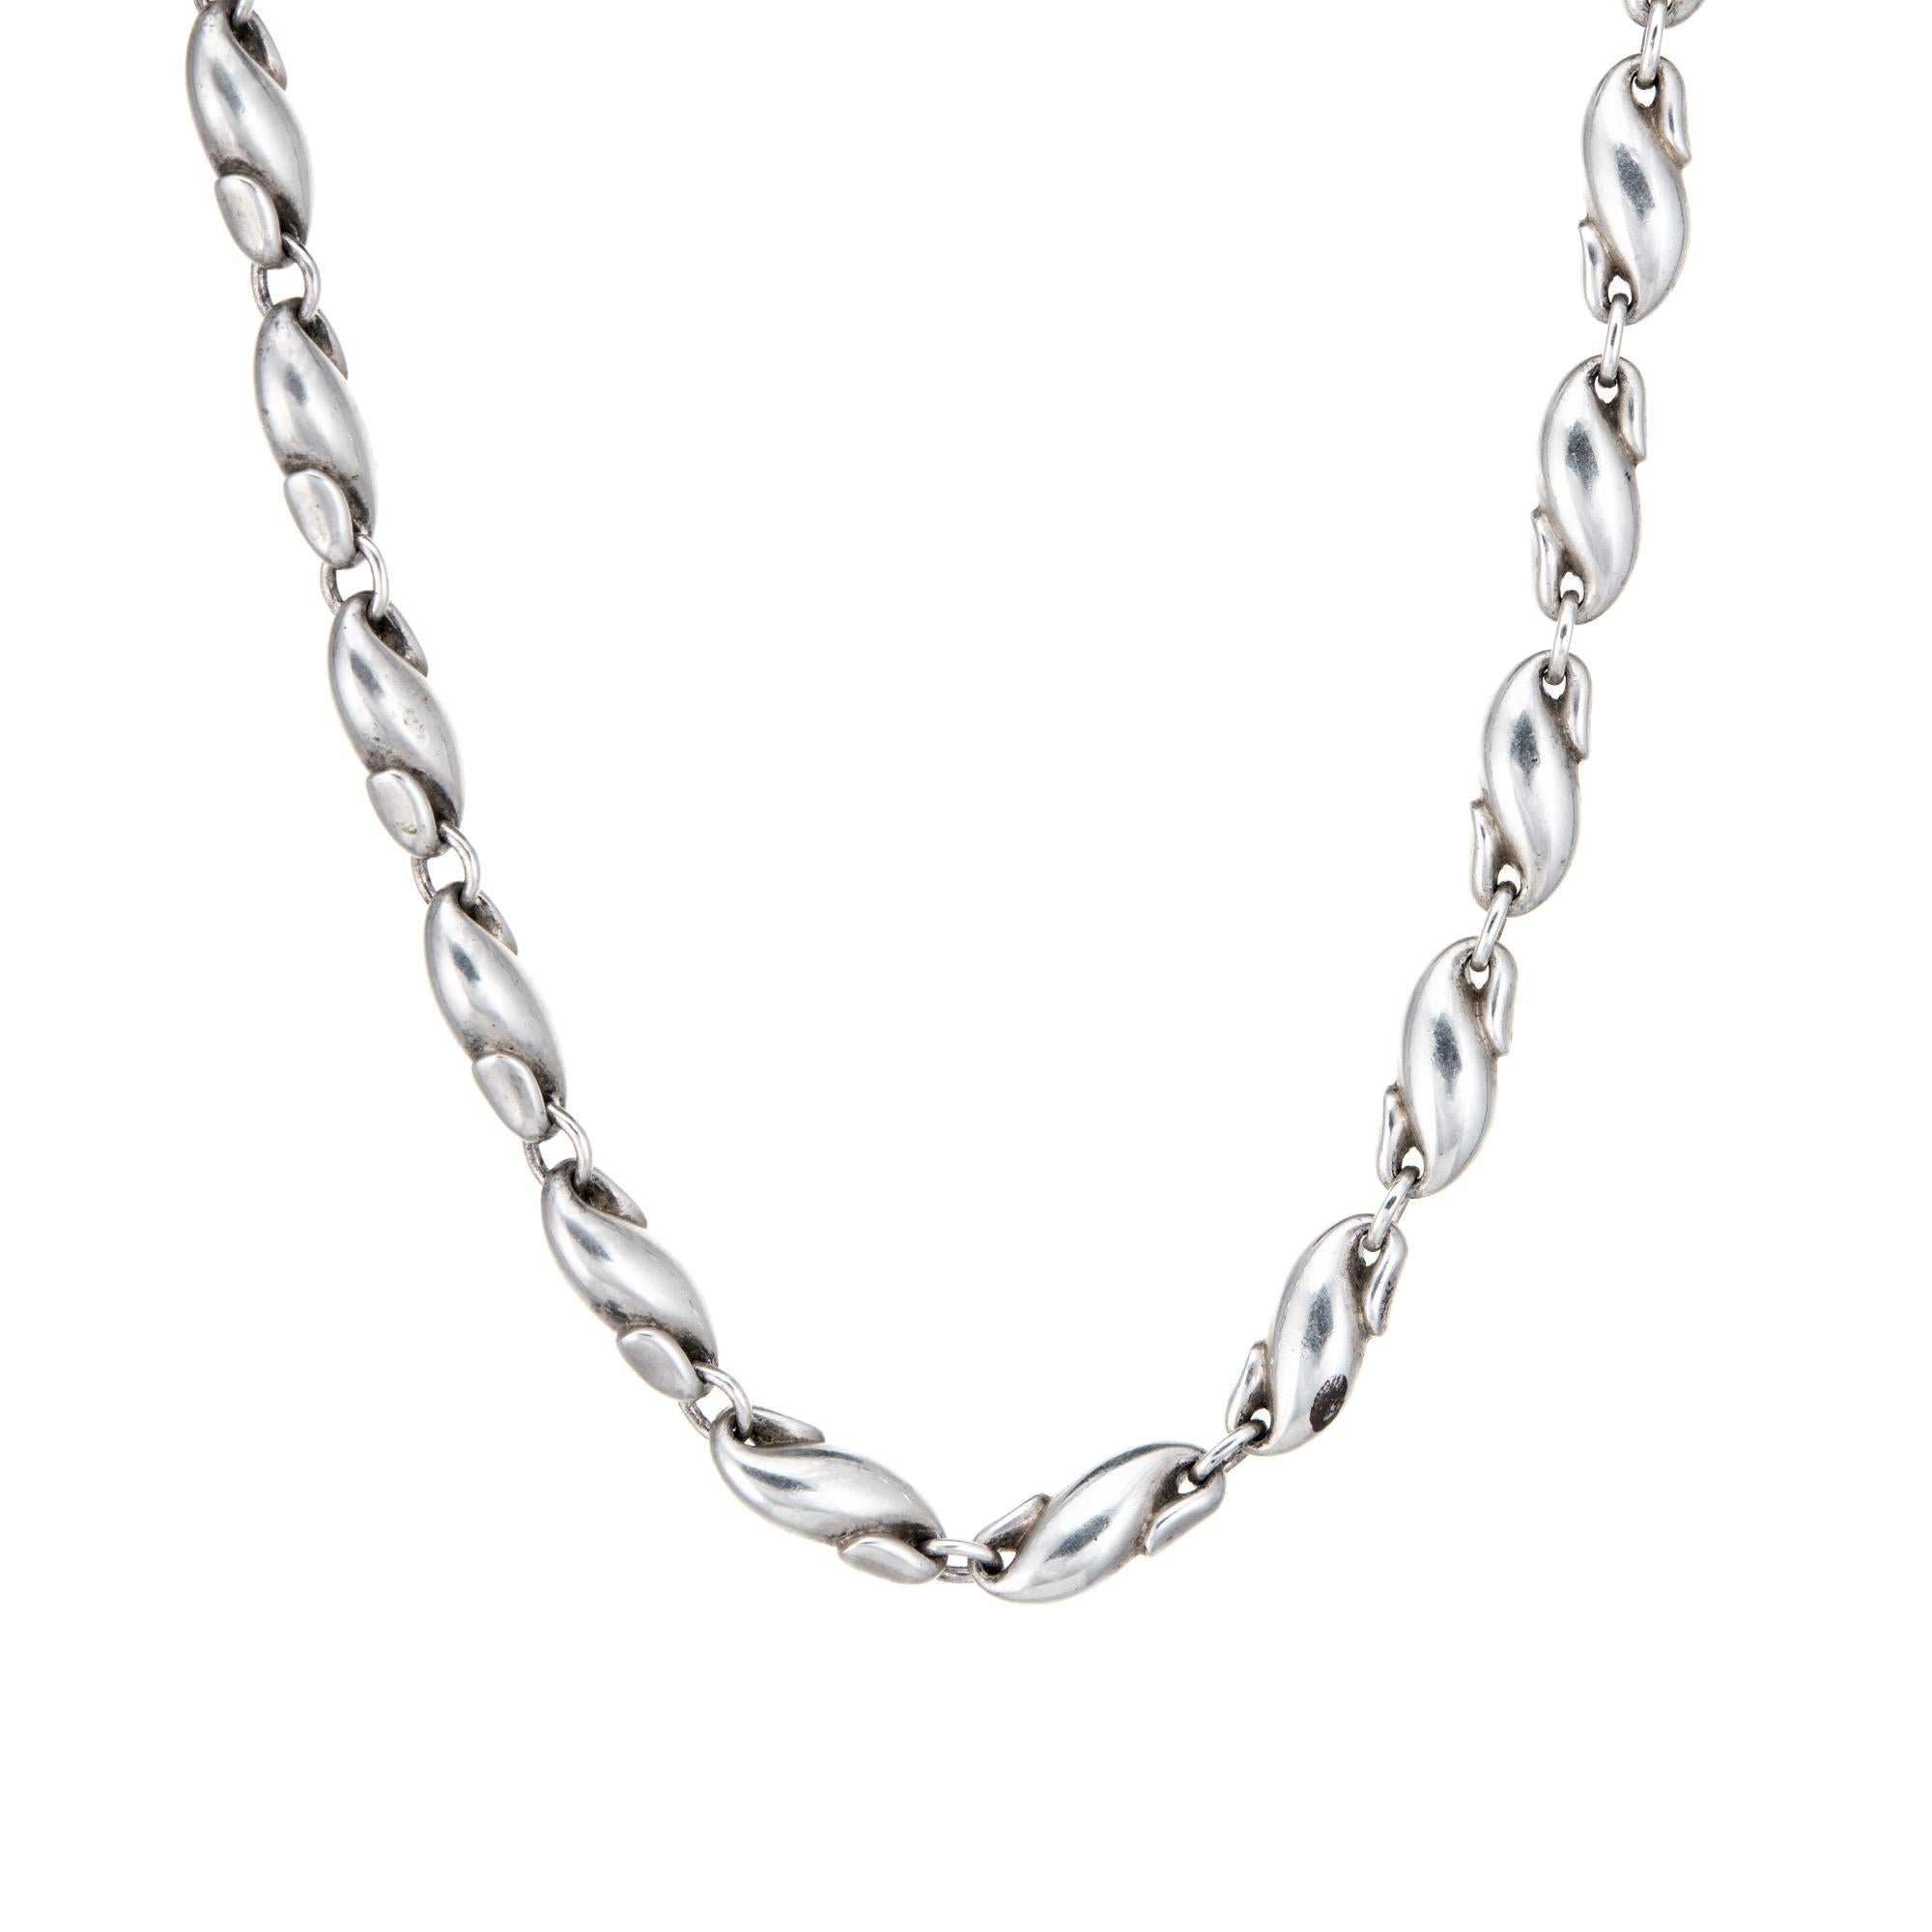 Stylish and finely detailed estate Tiffany & Co 'seahorse' link necklace, crafted in sterling silver.  

Designed by the famed Elsa Peretti the necklace features stylized 'seahorse' links. Measuring 16 inches in length the necklace sits nicely at